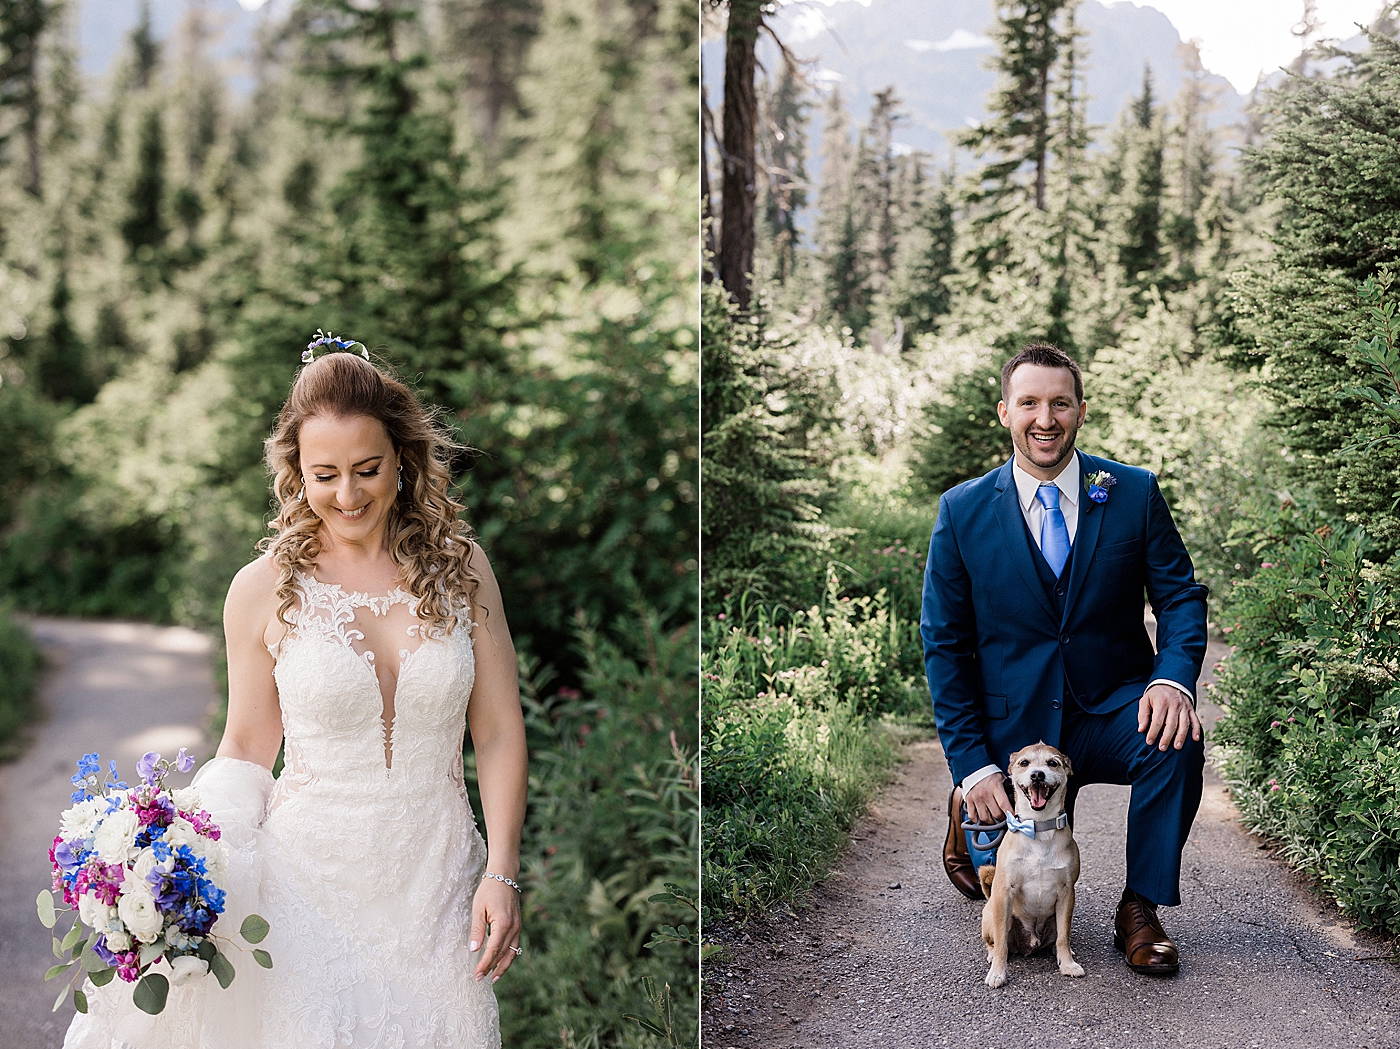 Bride and groom portraits with their dog. Photo by Megan Montalvo Photography.